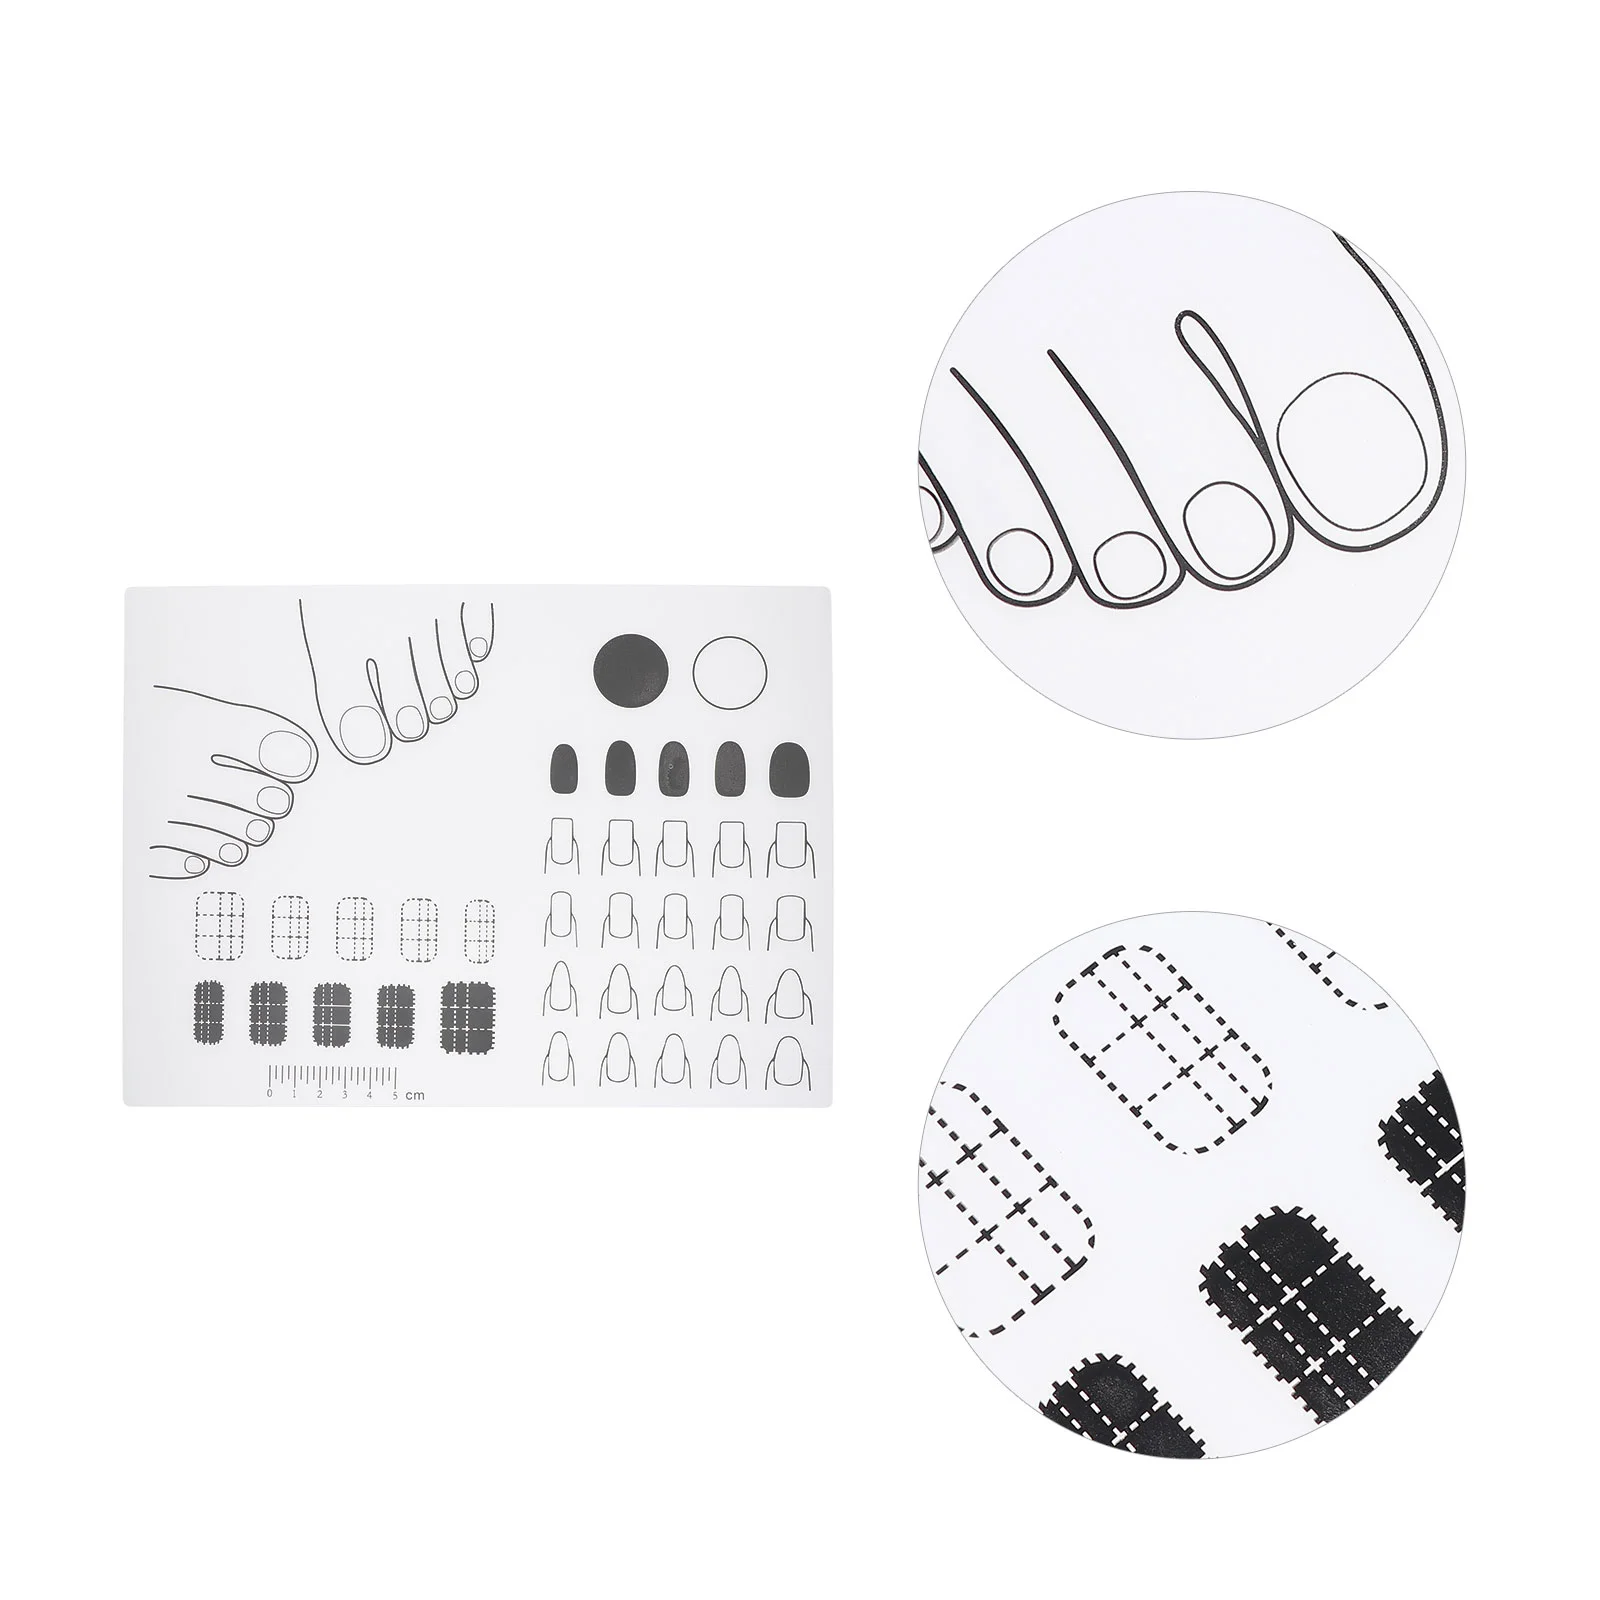 

Nail Mat Acrylic Silicone Practice Pad Training Stamping Sheet Manicure Nails Application Template Trainer Table Cover Matt Tool